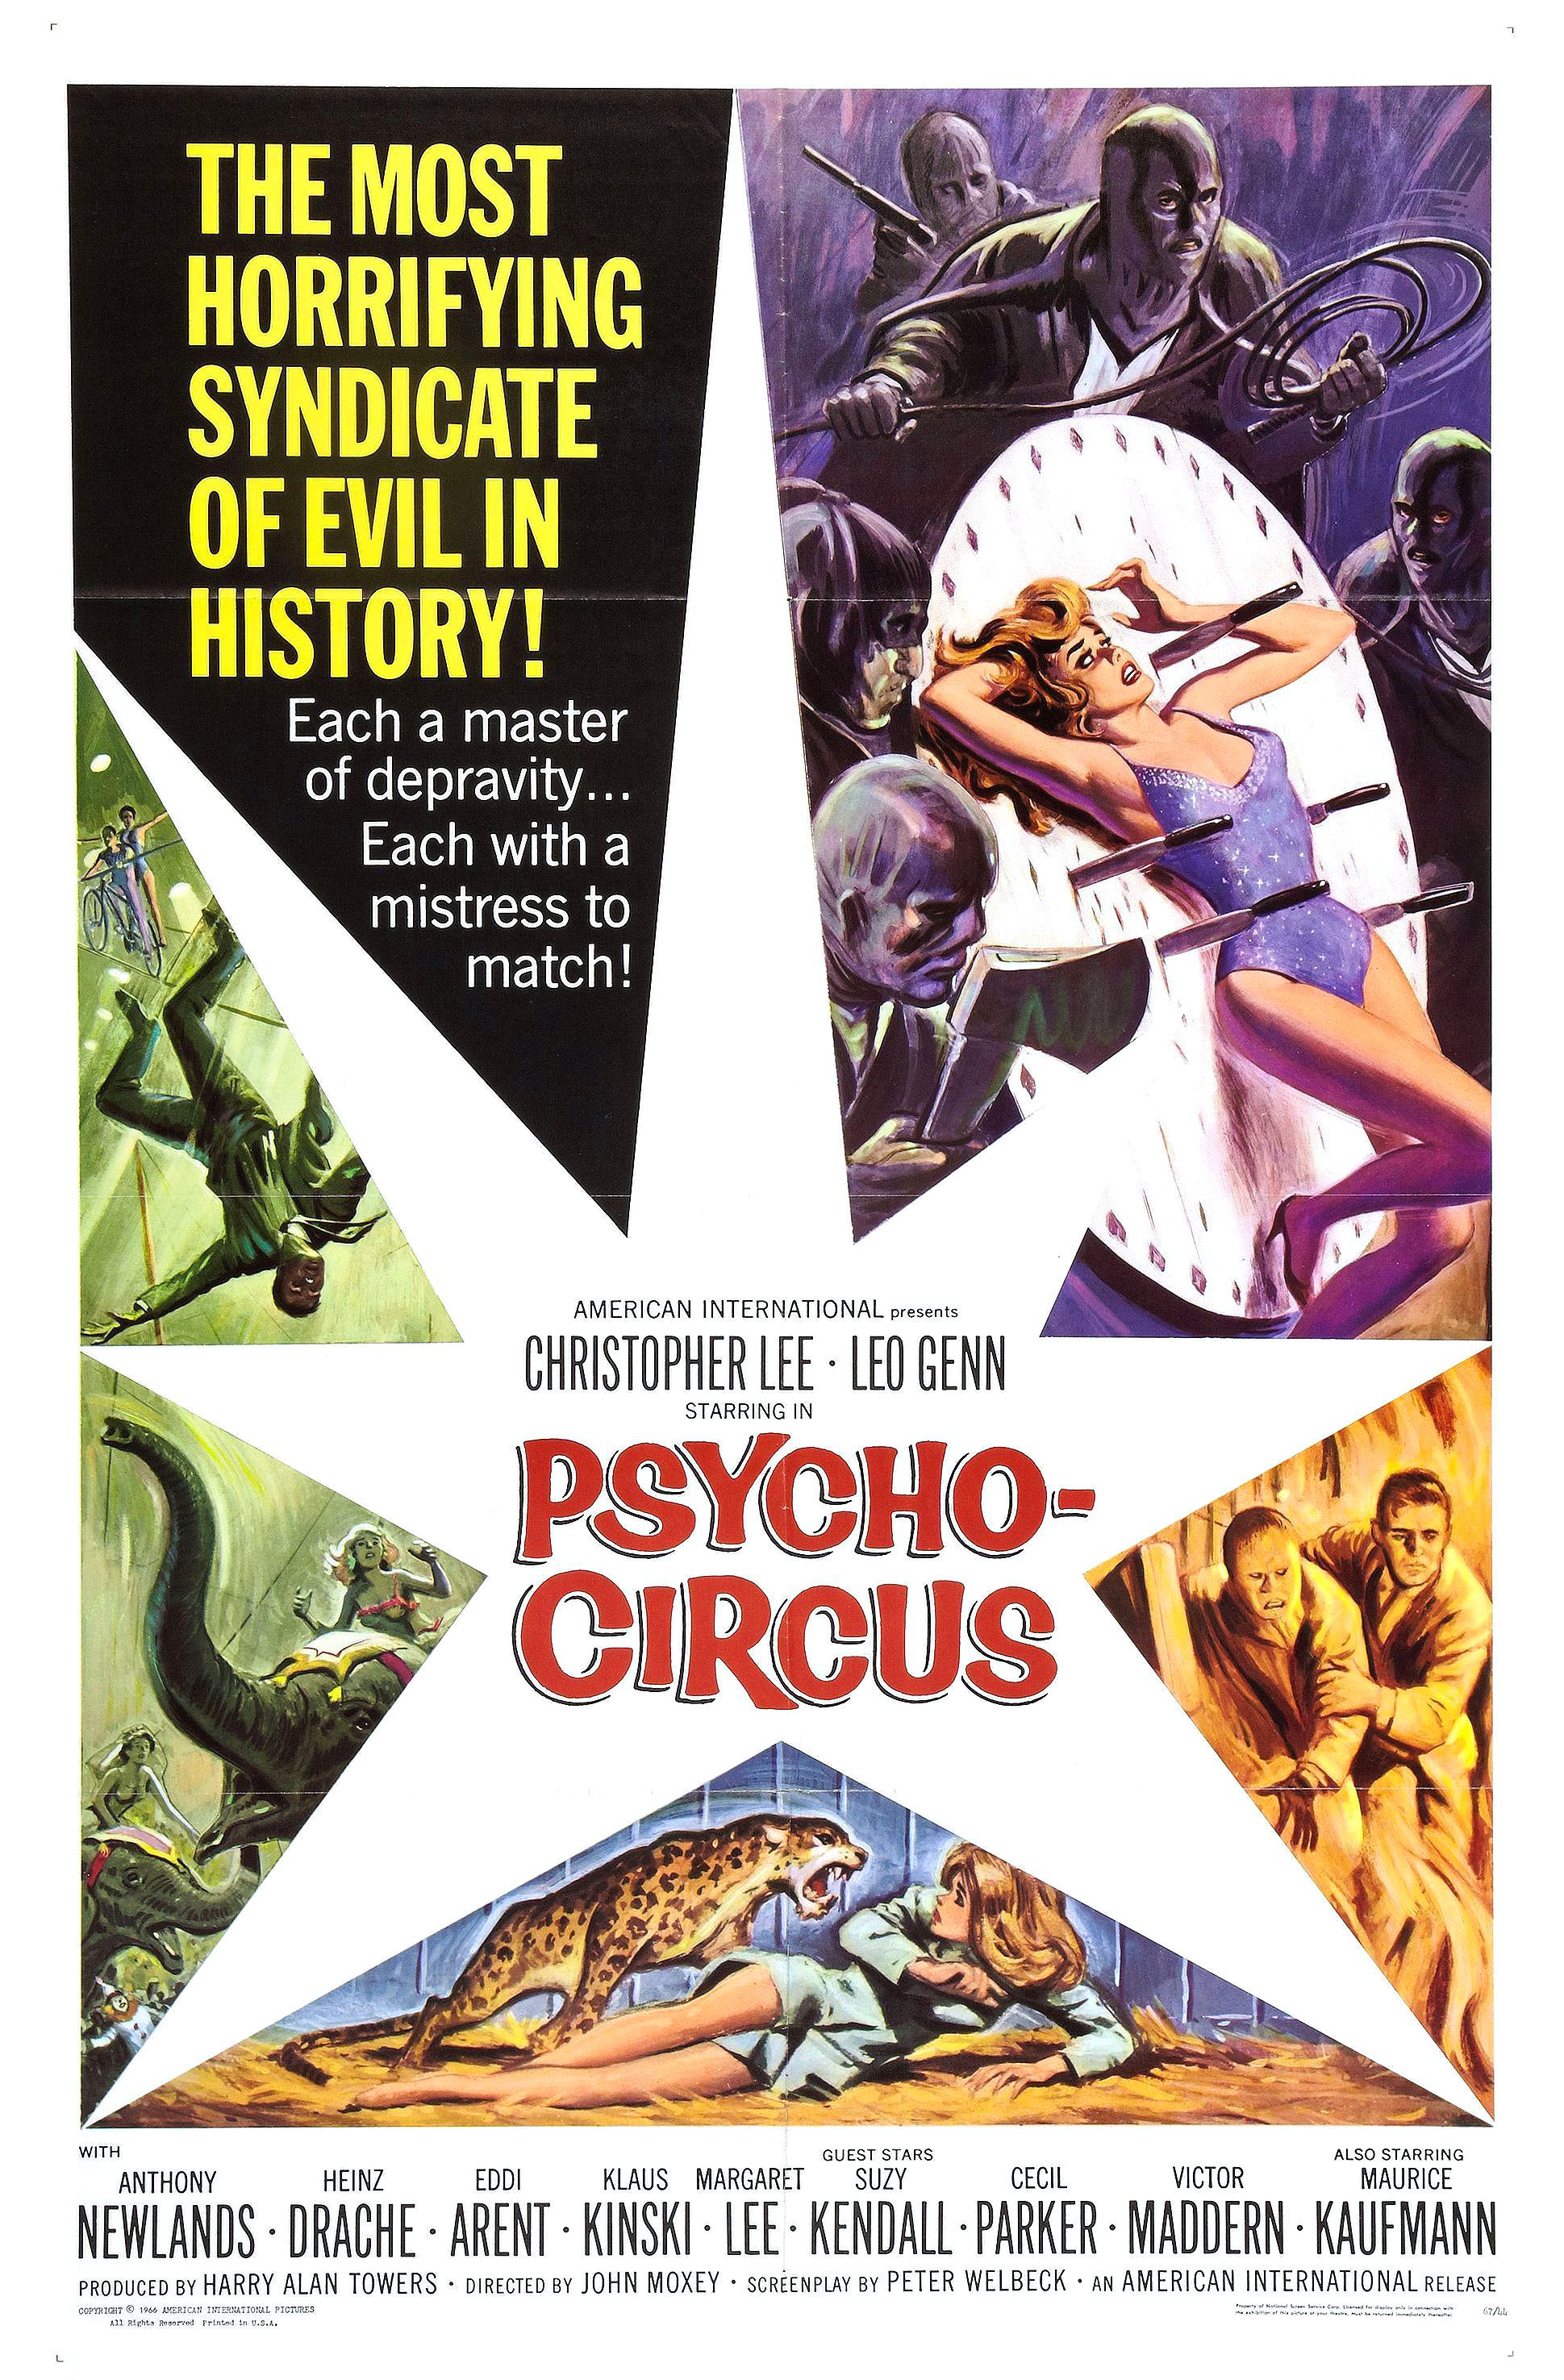 circus of fear 1966 - The Most Horrifying Syndicate Of Evil In History! Each a master of depravity... Each with a mistress to match! Christopher Lee "Leo Genn Psycho Circus Hony Eroon Kuus Wort Spyl Newlands Drache Arent Kinski Lee Kendall Parker Vie Madd